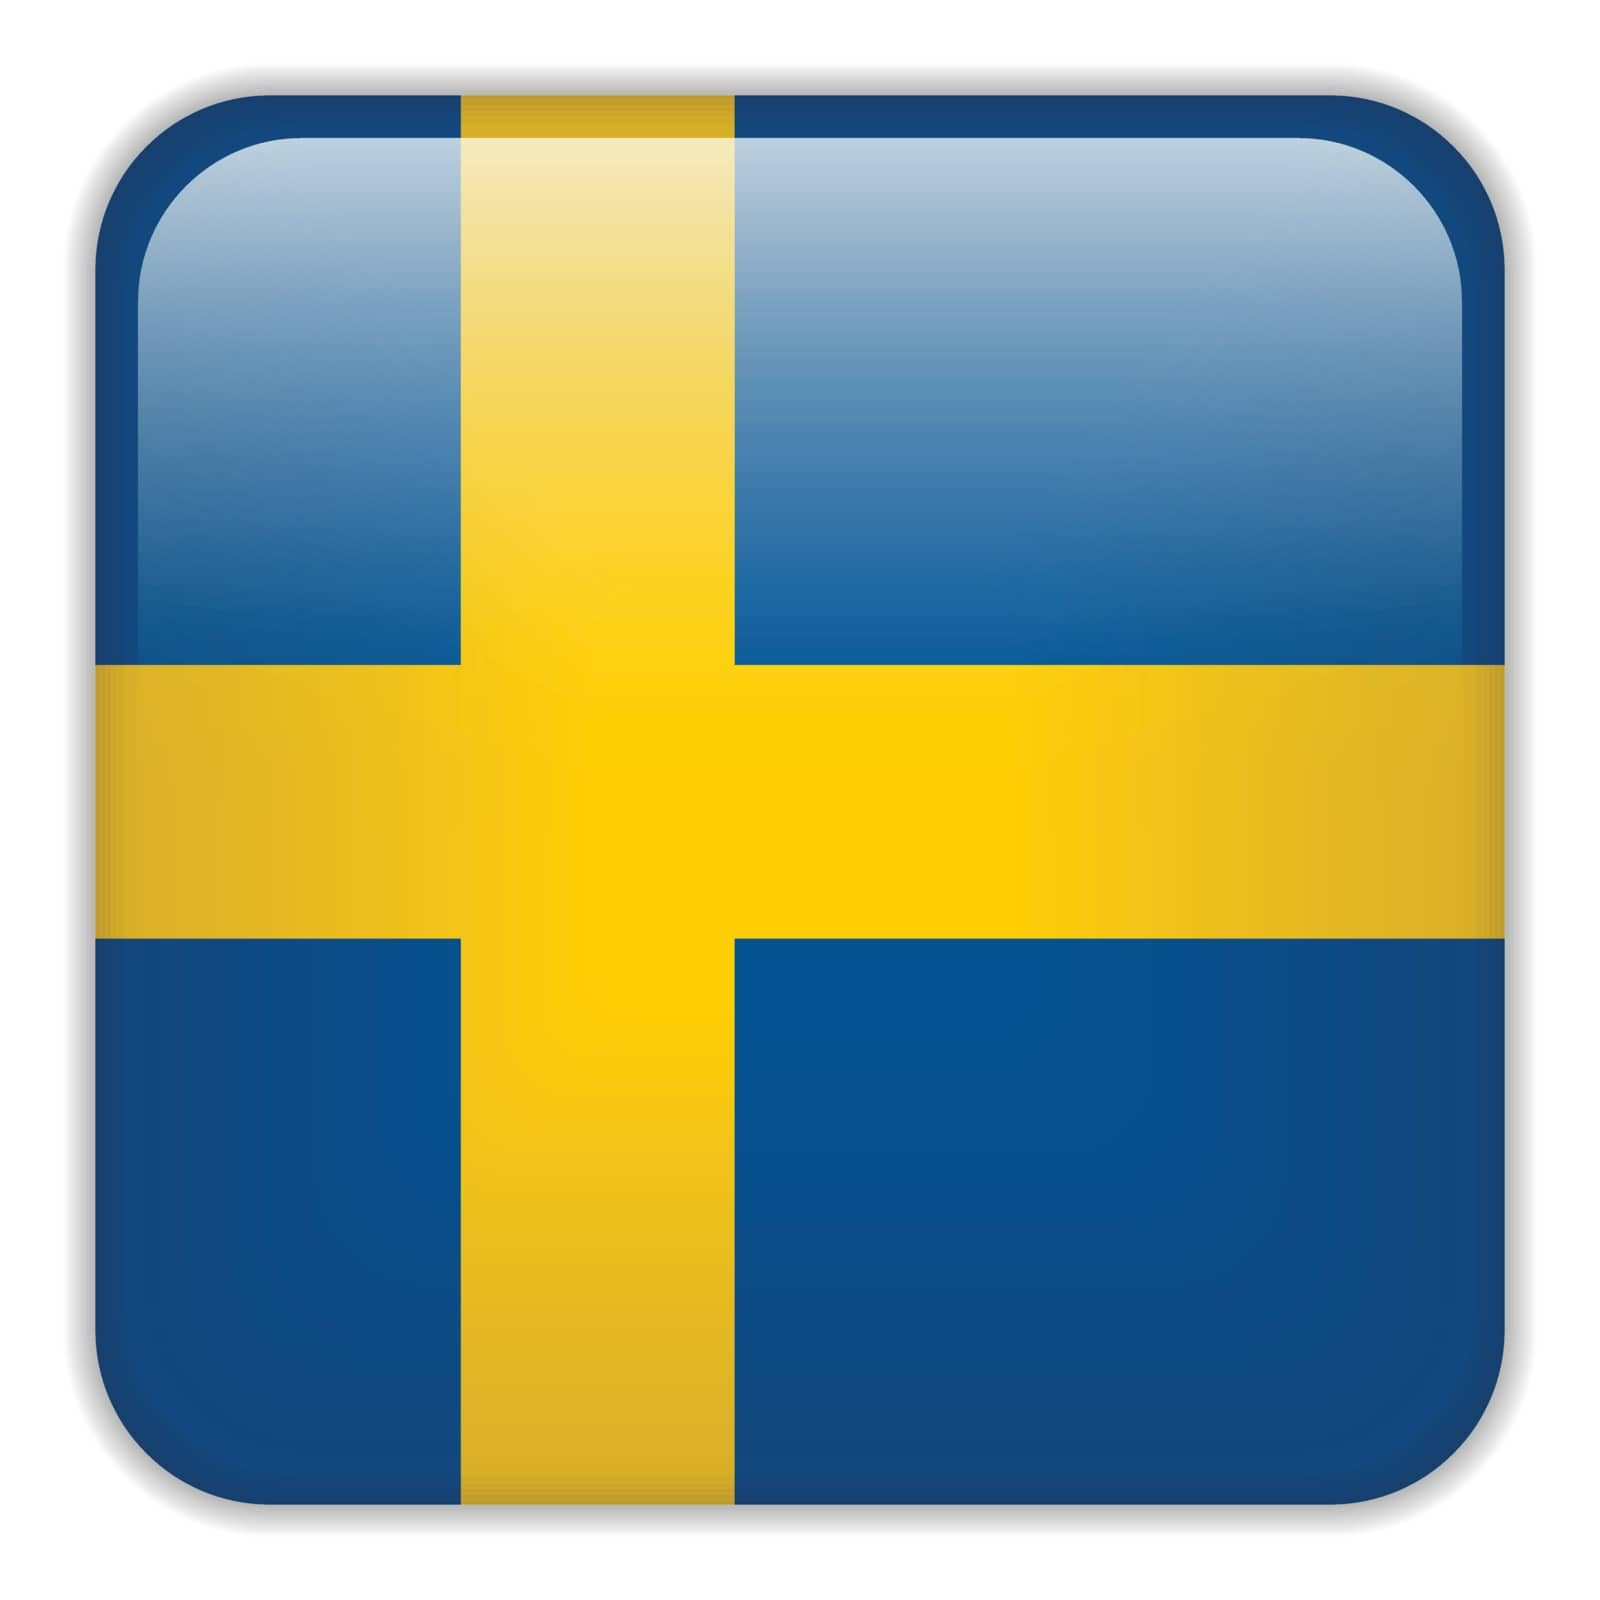 Sweden Flag Smartphone Application Square Buttons by gubh83